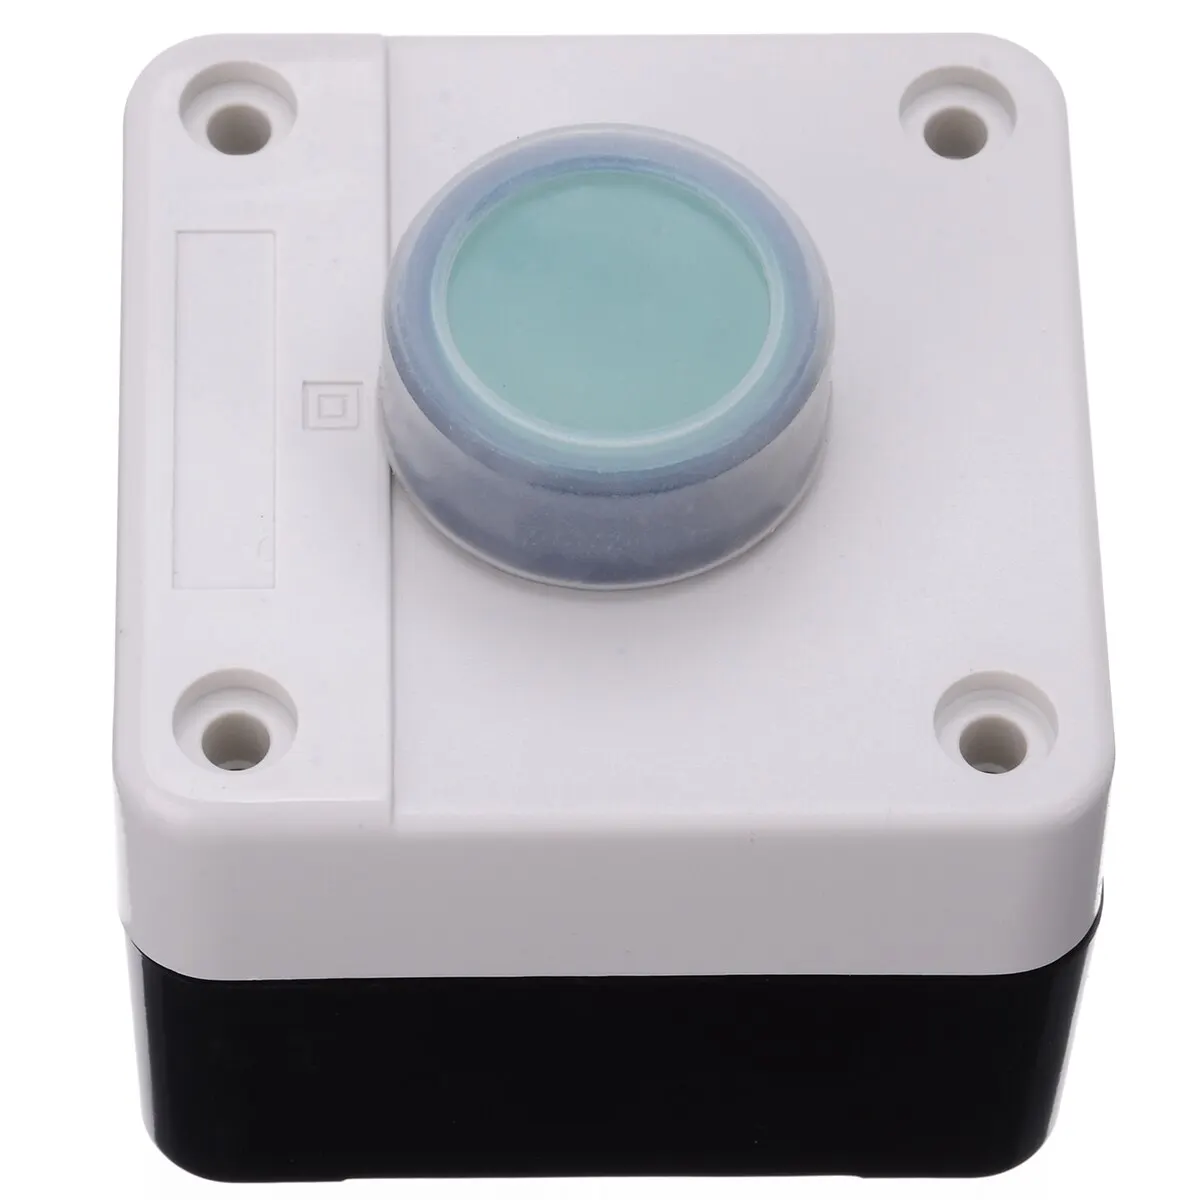 One Button Control Box Waterproof Push Button Switch for Gate Opener Handhold Control Box